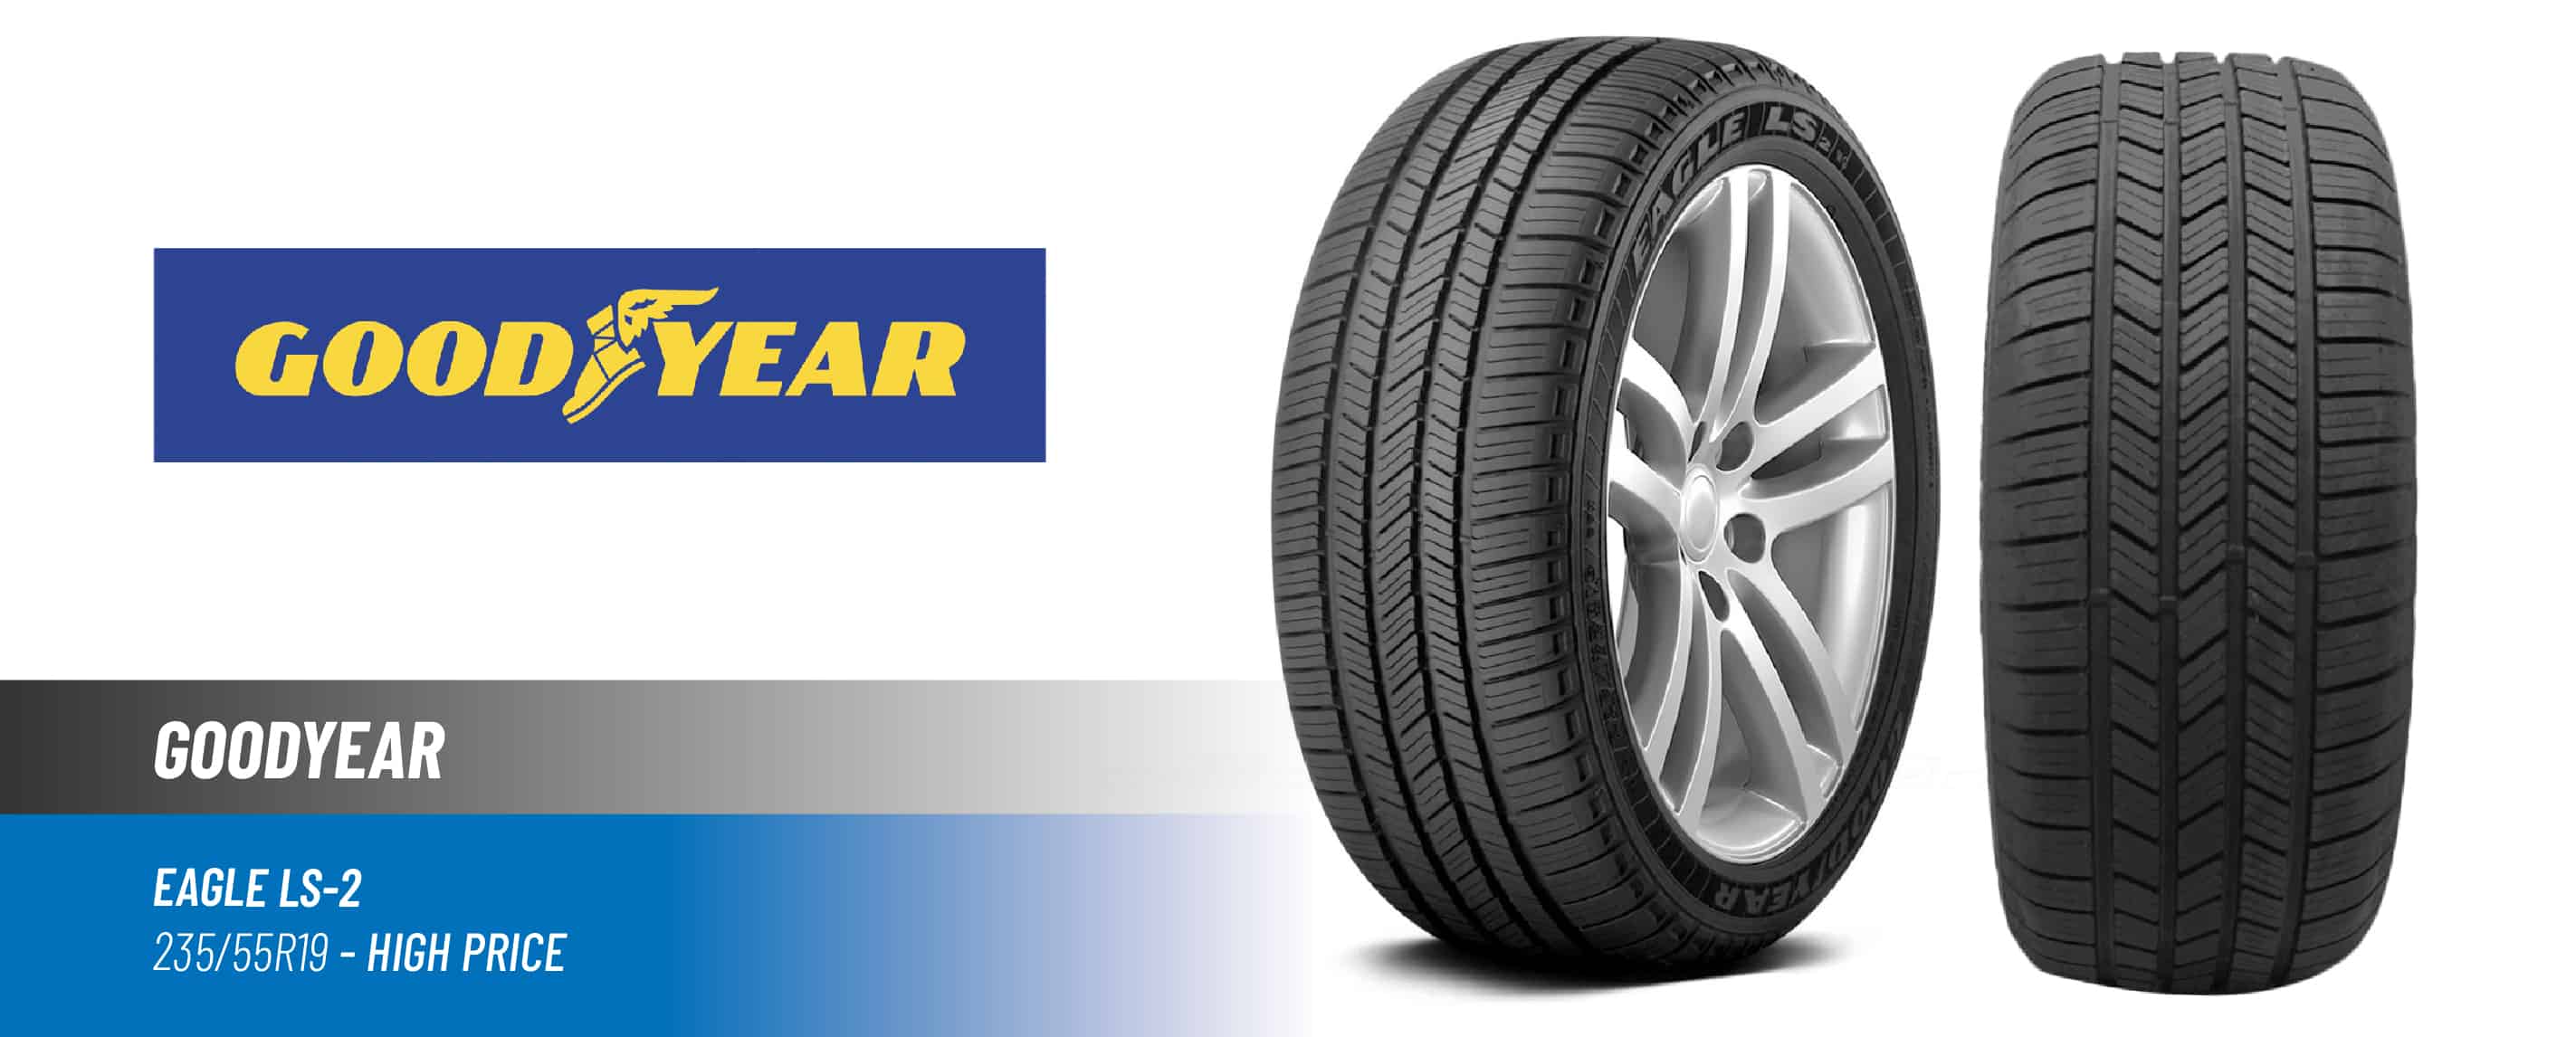 Top#1 High Price: Goodyear Eagle LS-2 – best 235/55R19